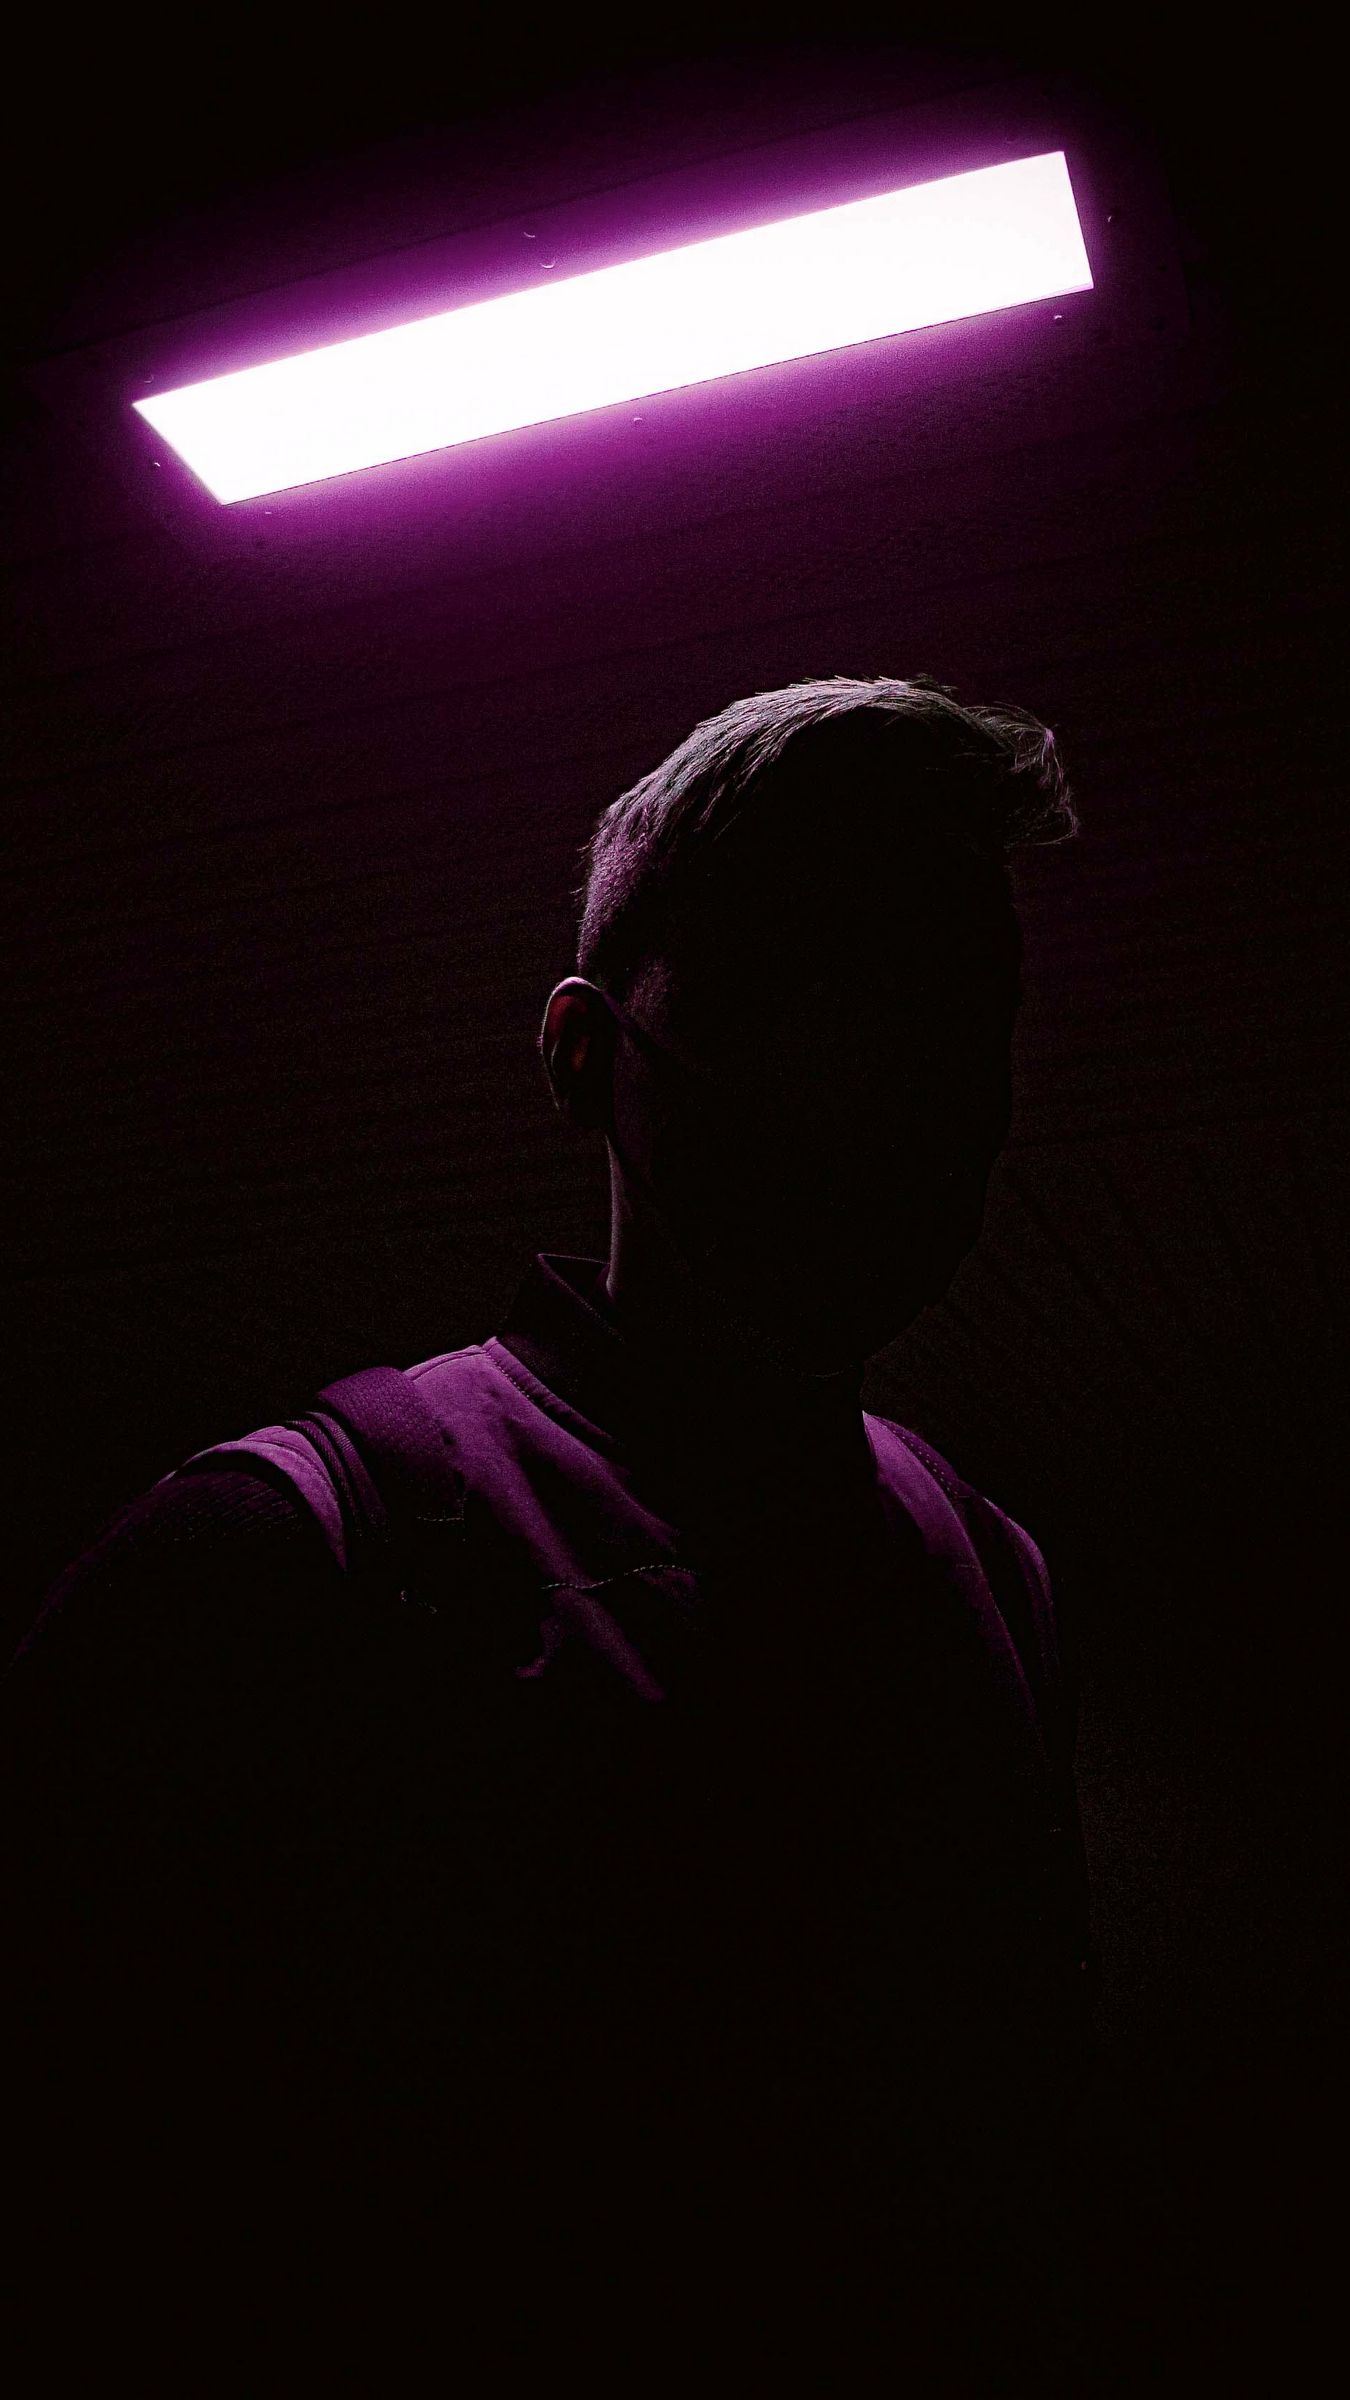 A man standing under a purple neon light in a dark room with his back turned. - Shadow